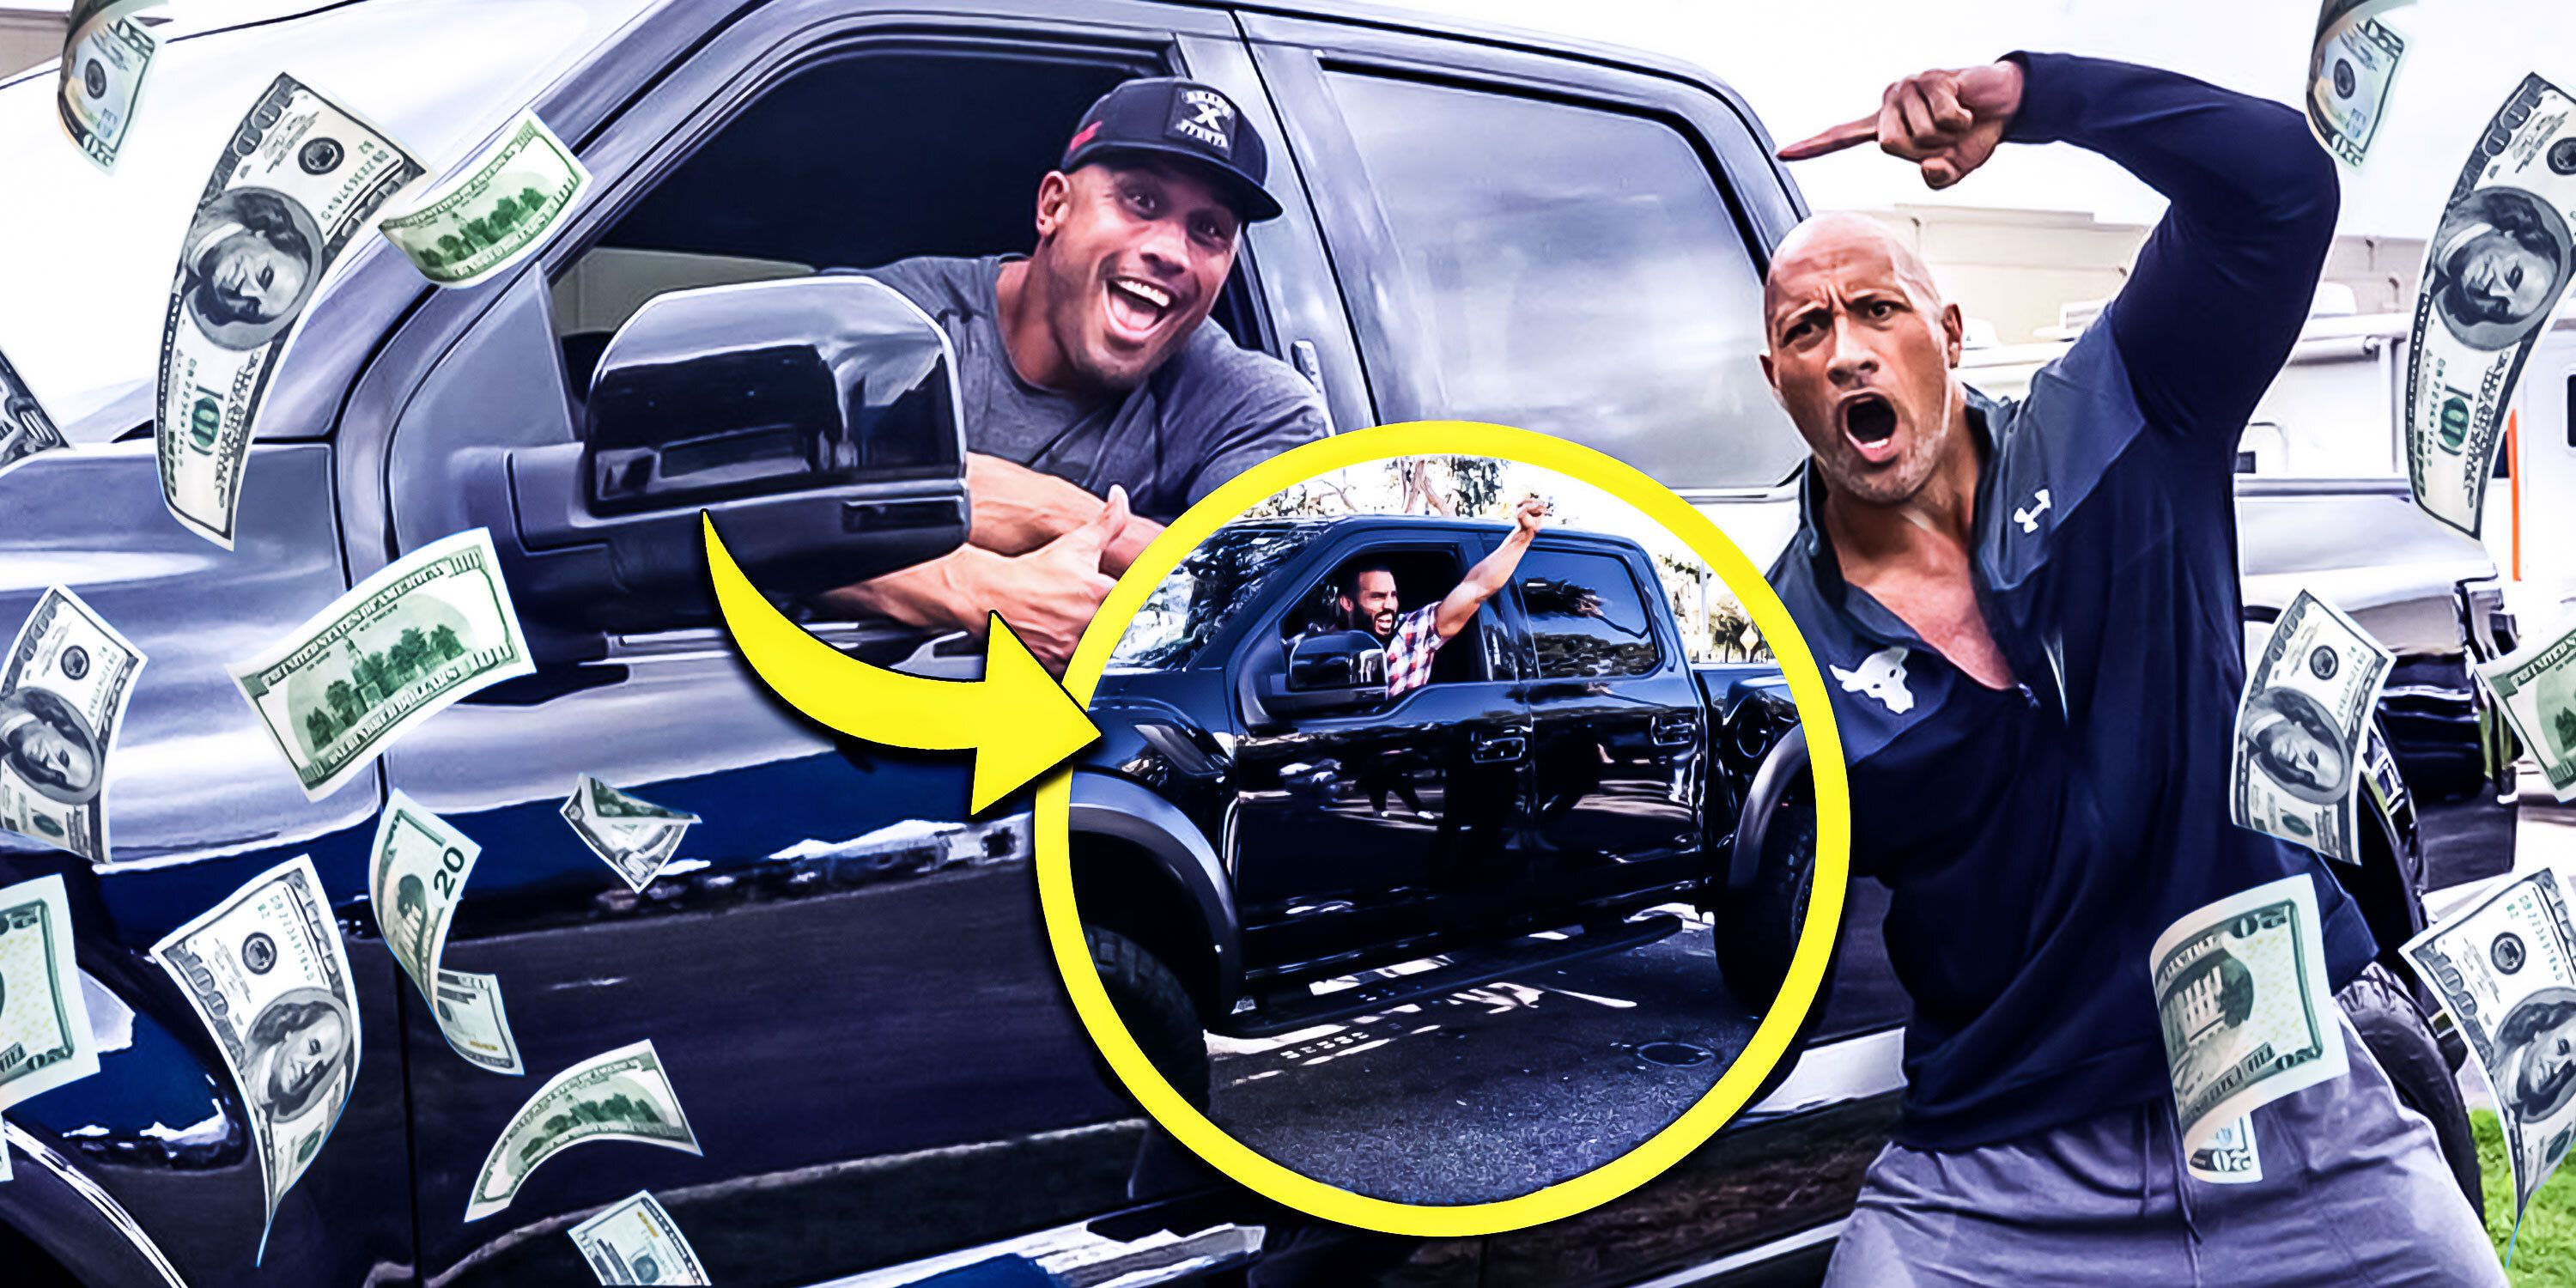 The Rock gifts his truck and money